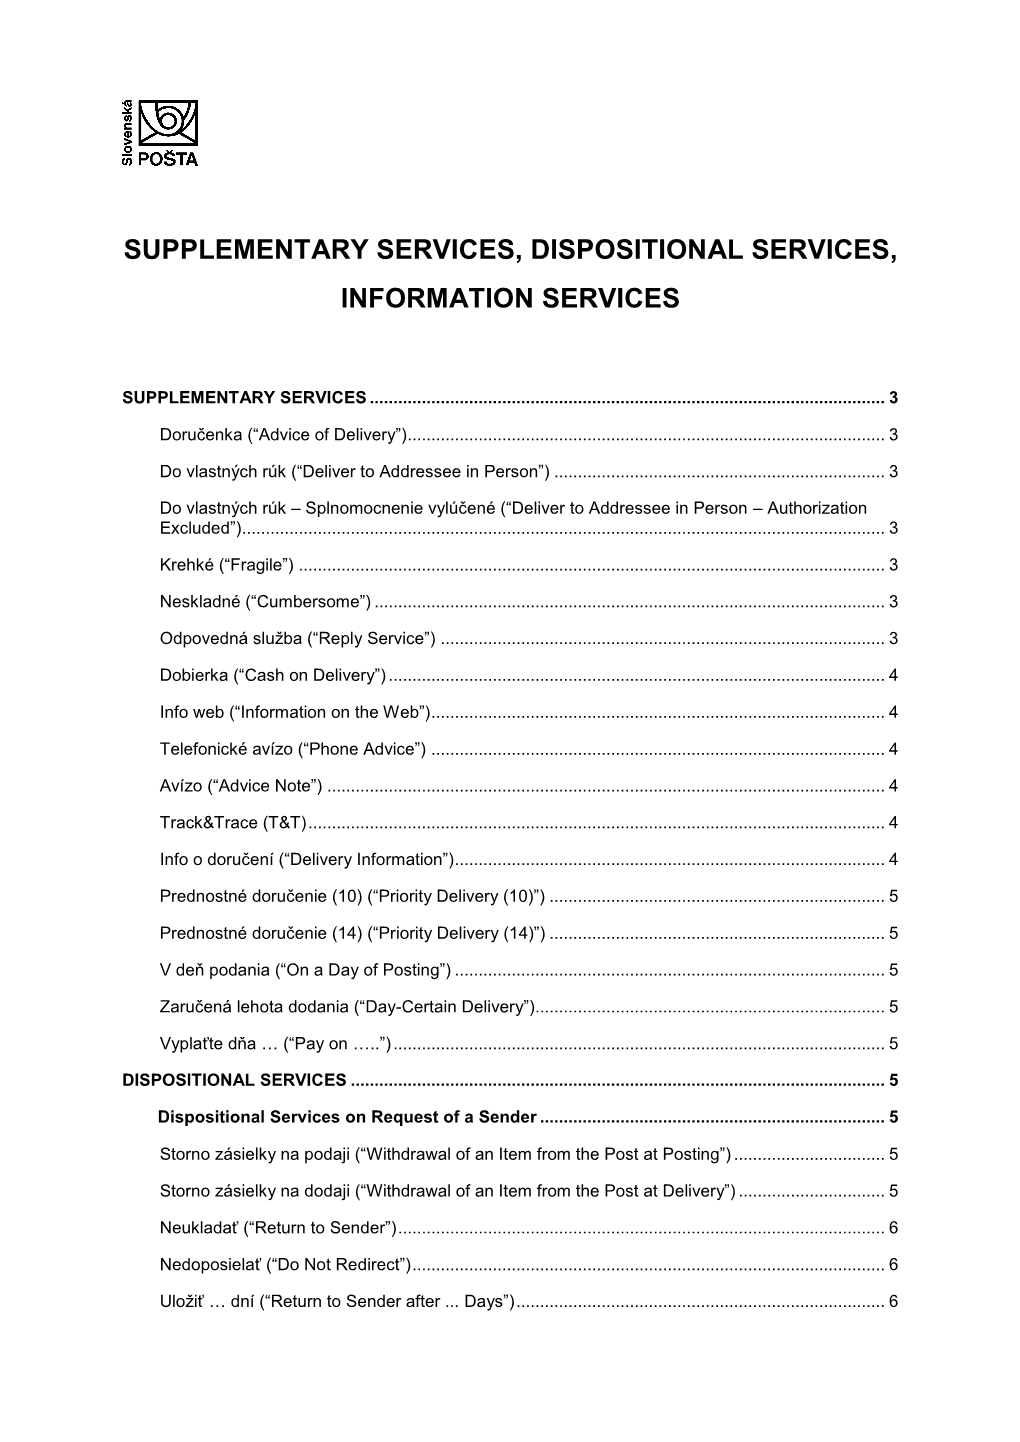 Supplementary Services, Dispositional Services